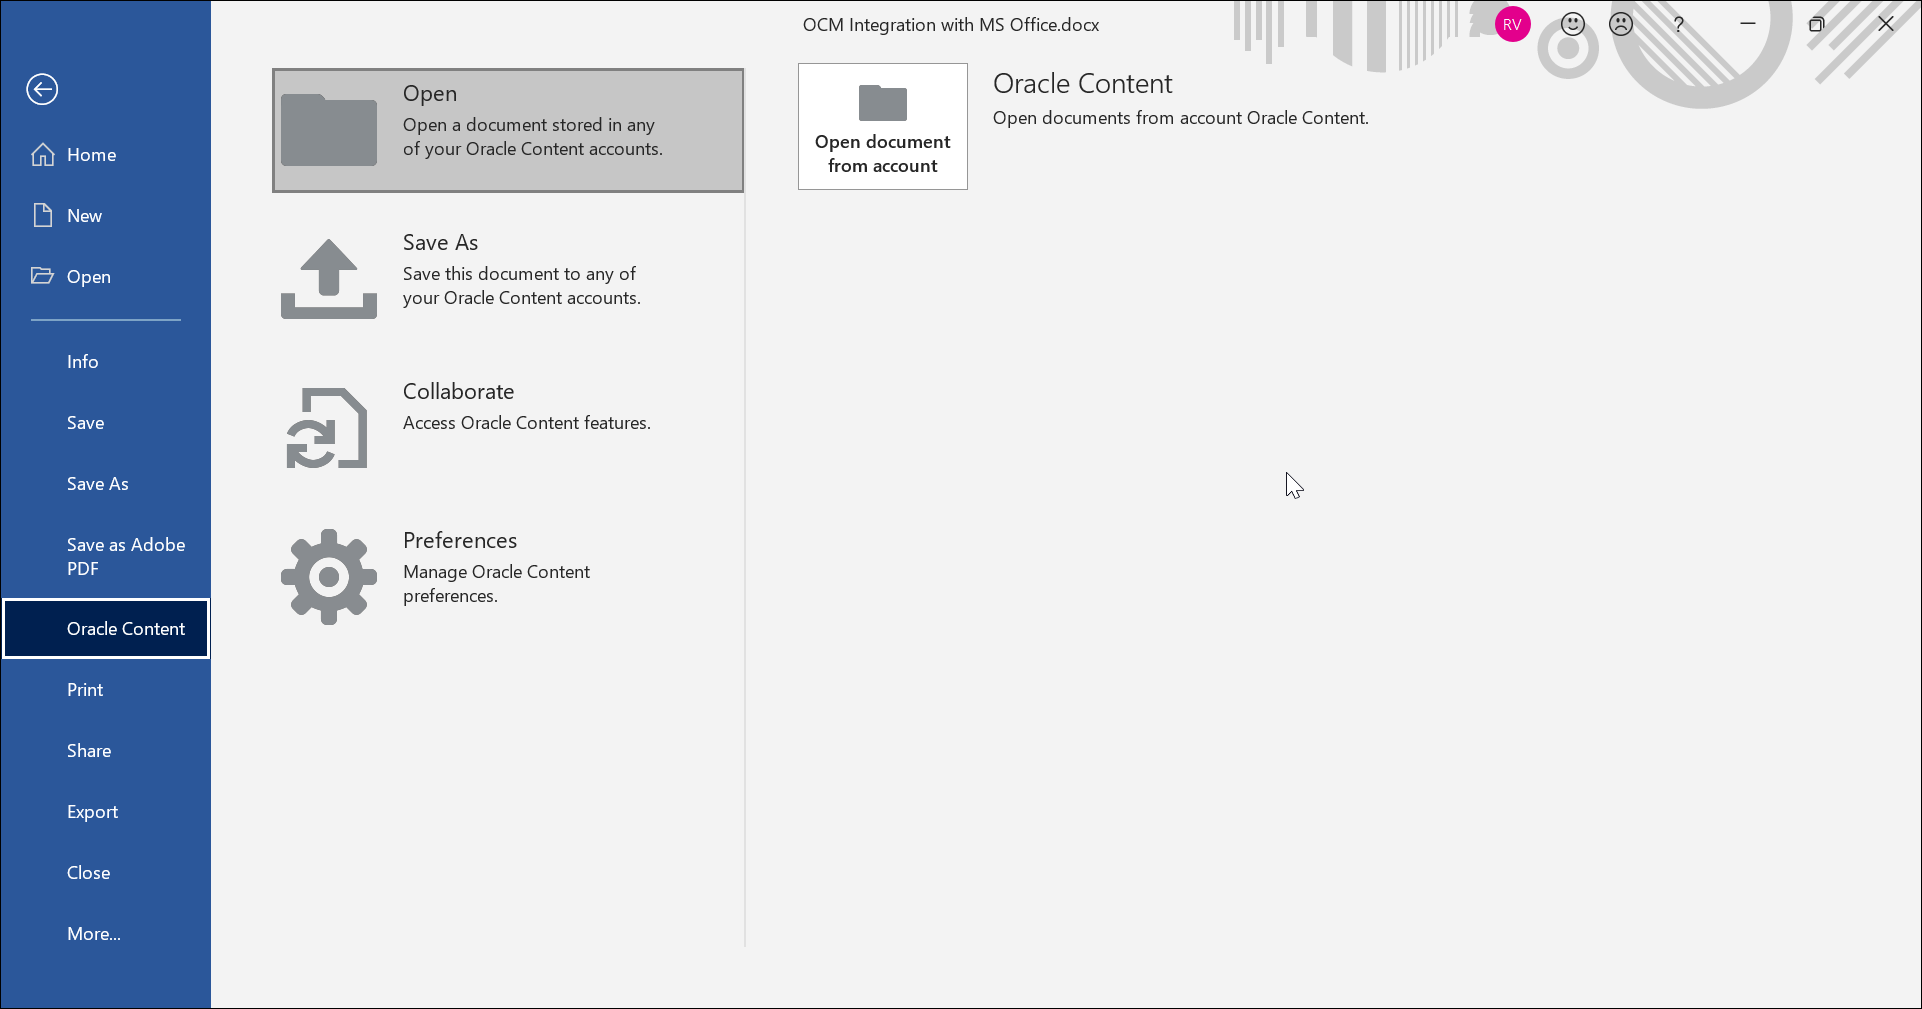 Add Oracle content as a save/open location in Office applications